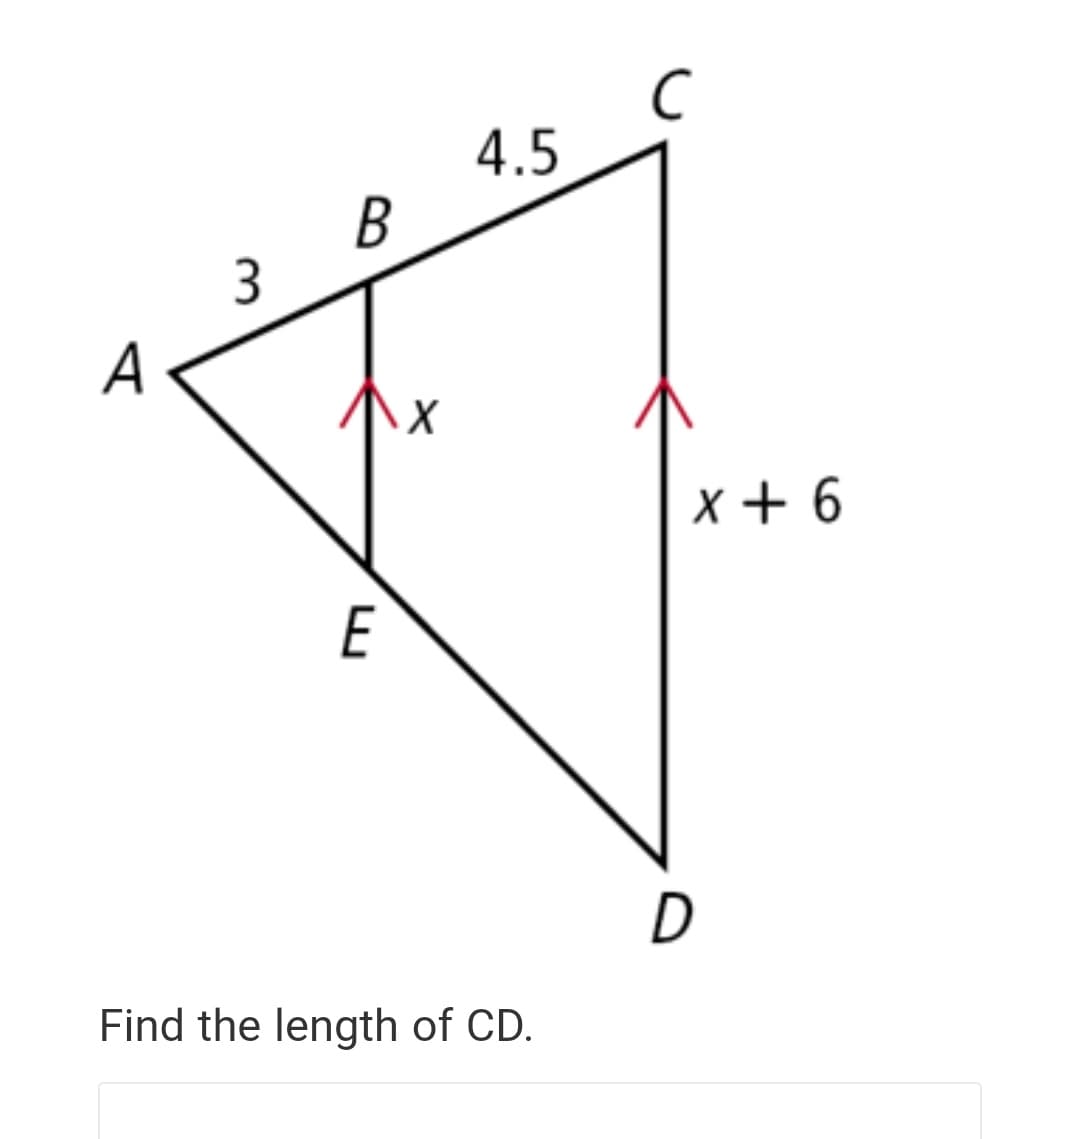 4.5
B
A
x + 6
E
D
Find the length of CD.
